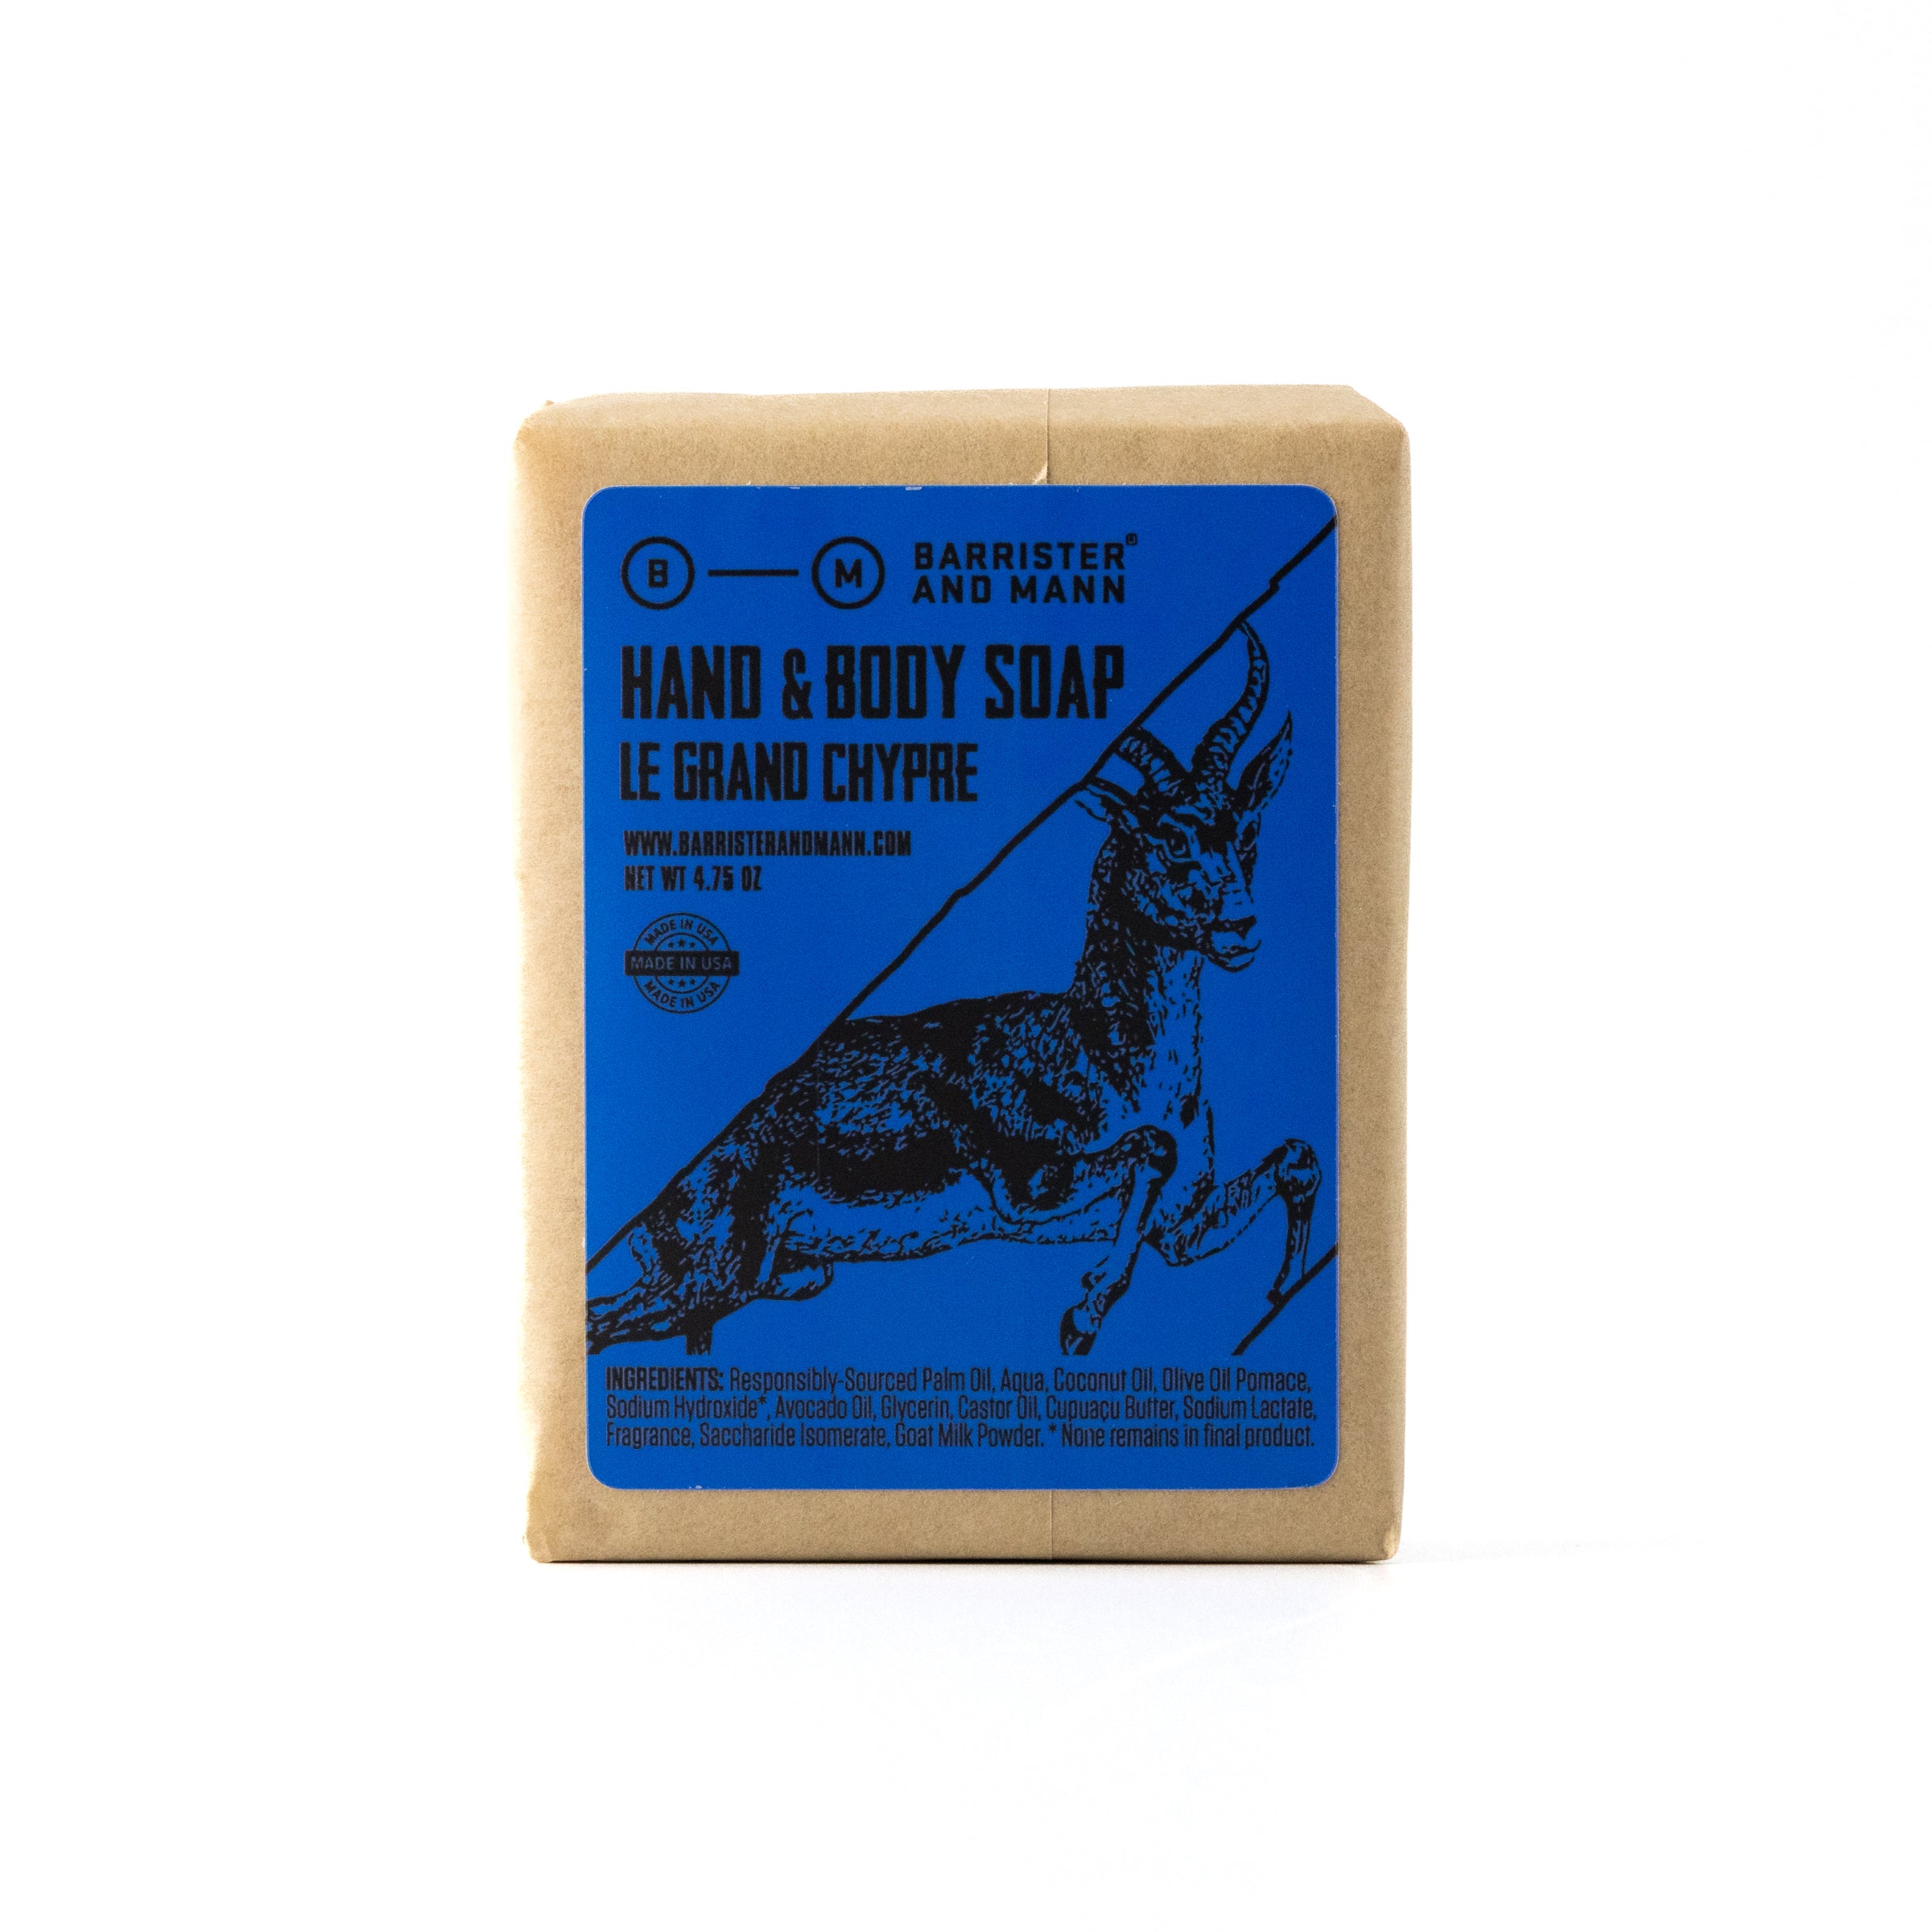 Hand &amp; Body Soap: Le Grand Chypre - Barrister and Mann LLC